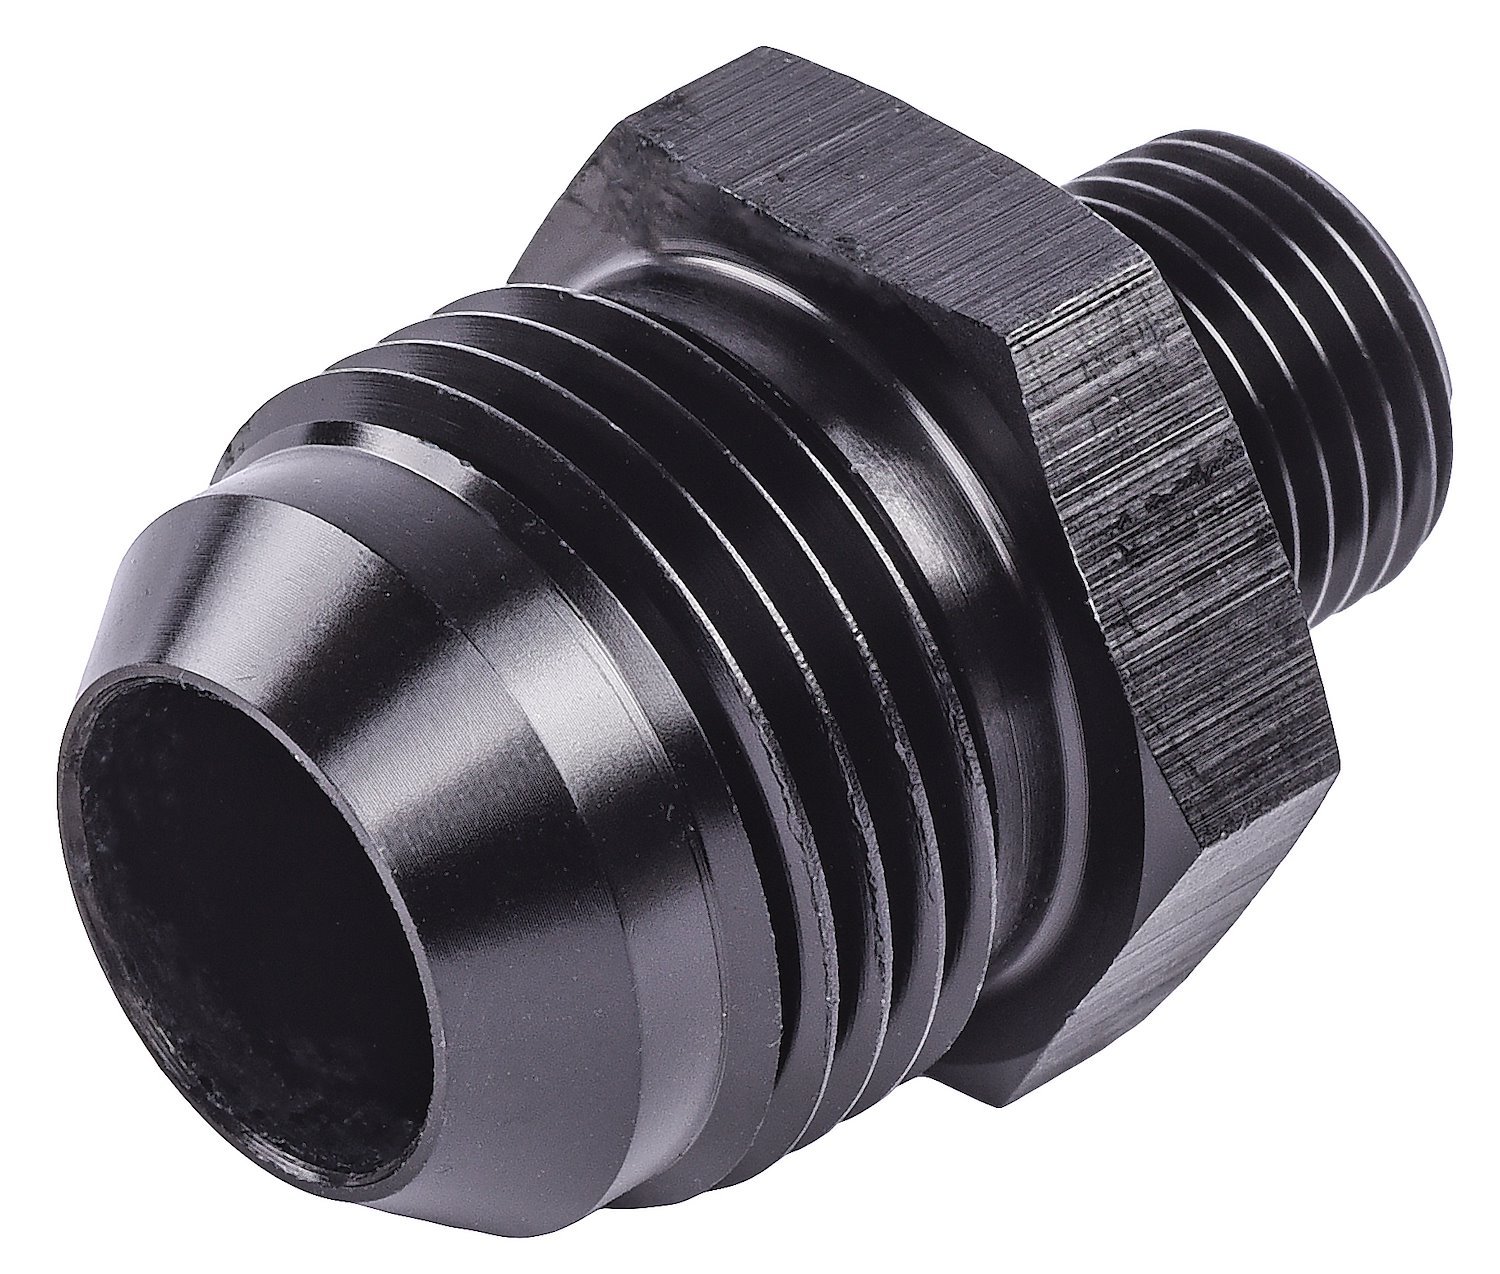 AN to Metric Adapter Fitting [-12 AN Male to 16mm x 1.5 Male, Black]